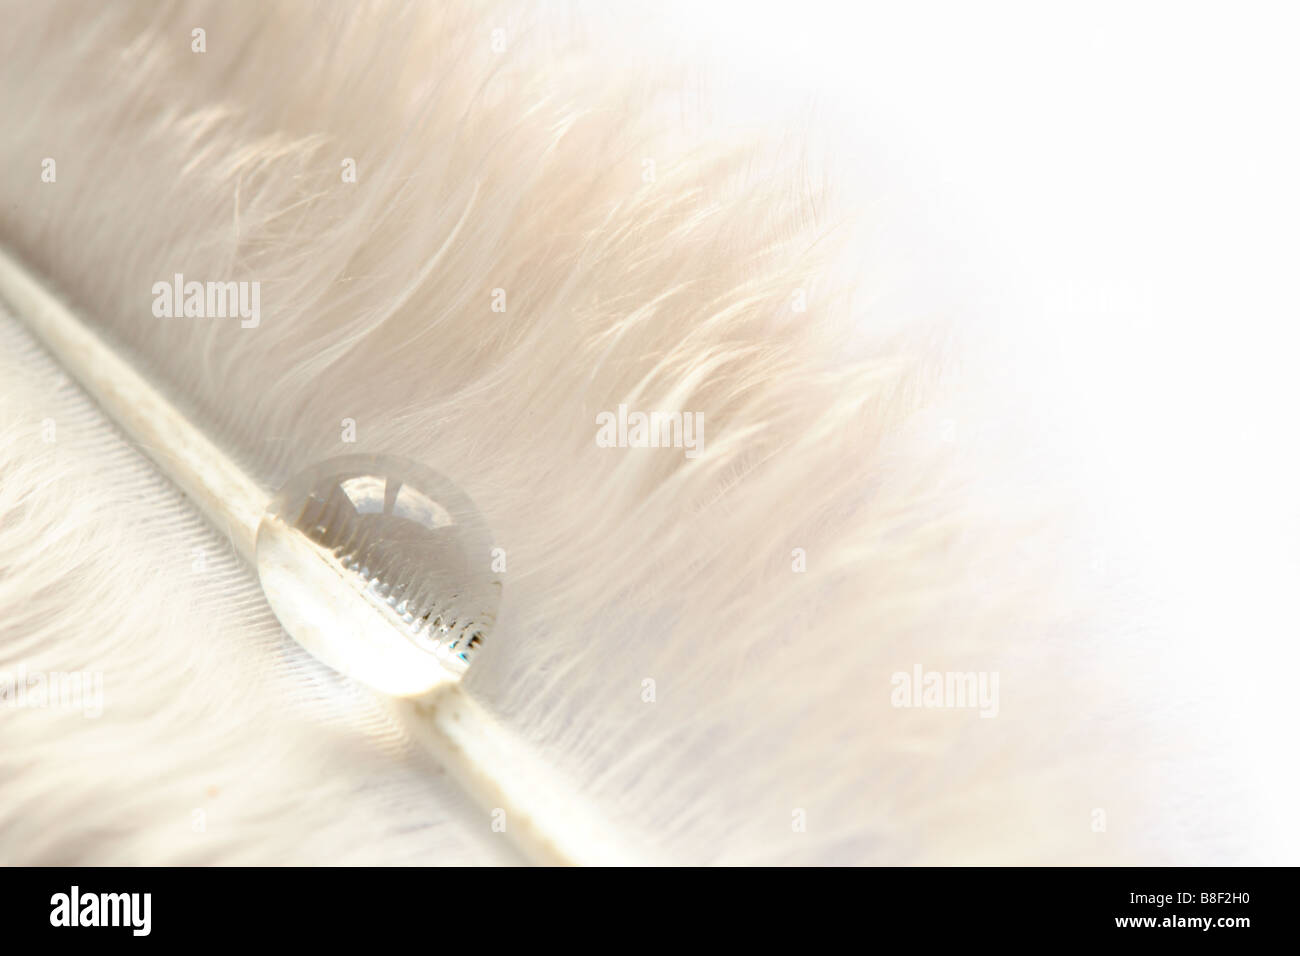 Bird feather with a droplet of water Stock Photo